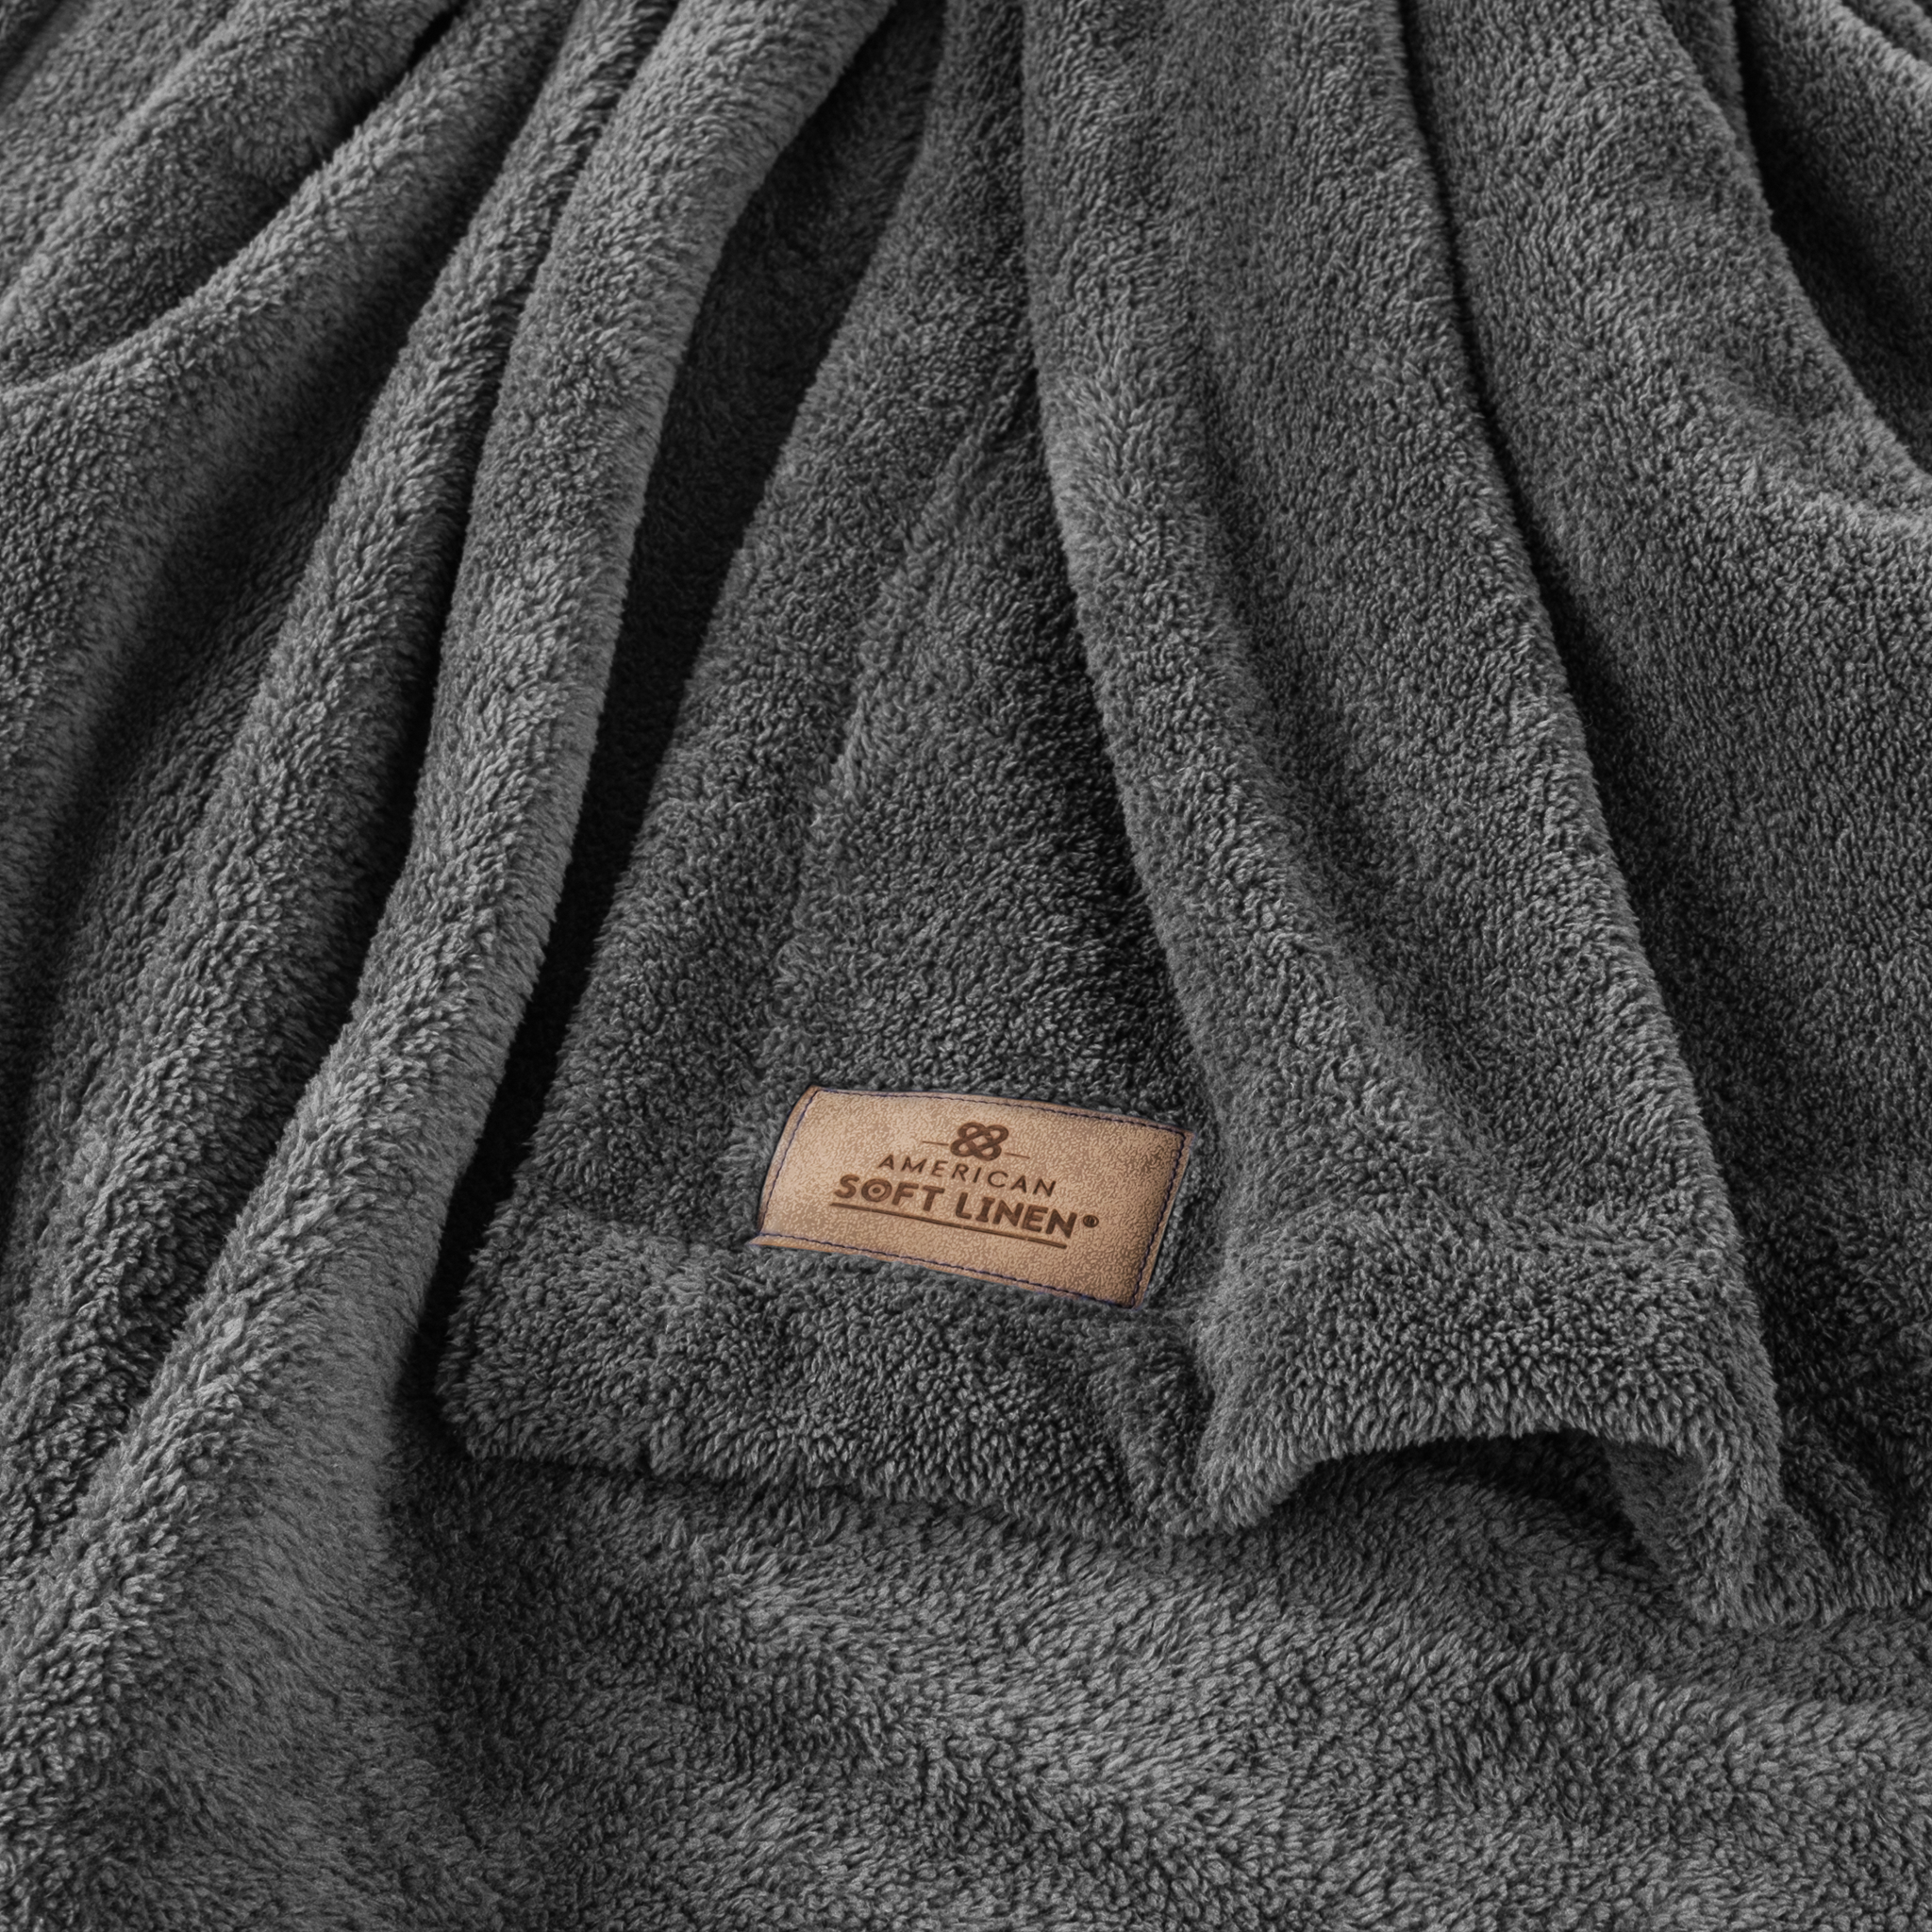 American Soft Linen - Bedding Fleece Blanket - Wholesale - 15 Set Case Pack - Twin Size 60x80 inches - Gray - 4